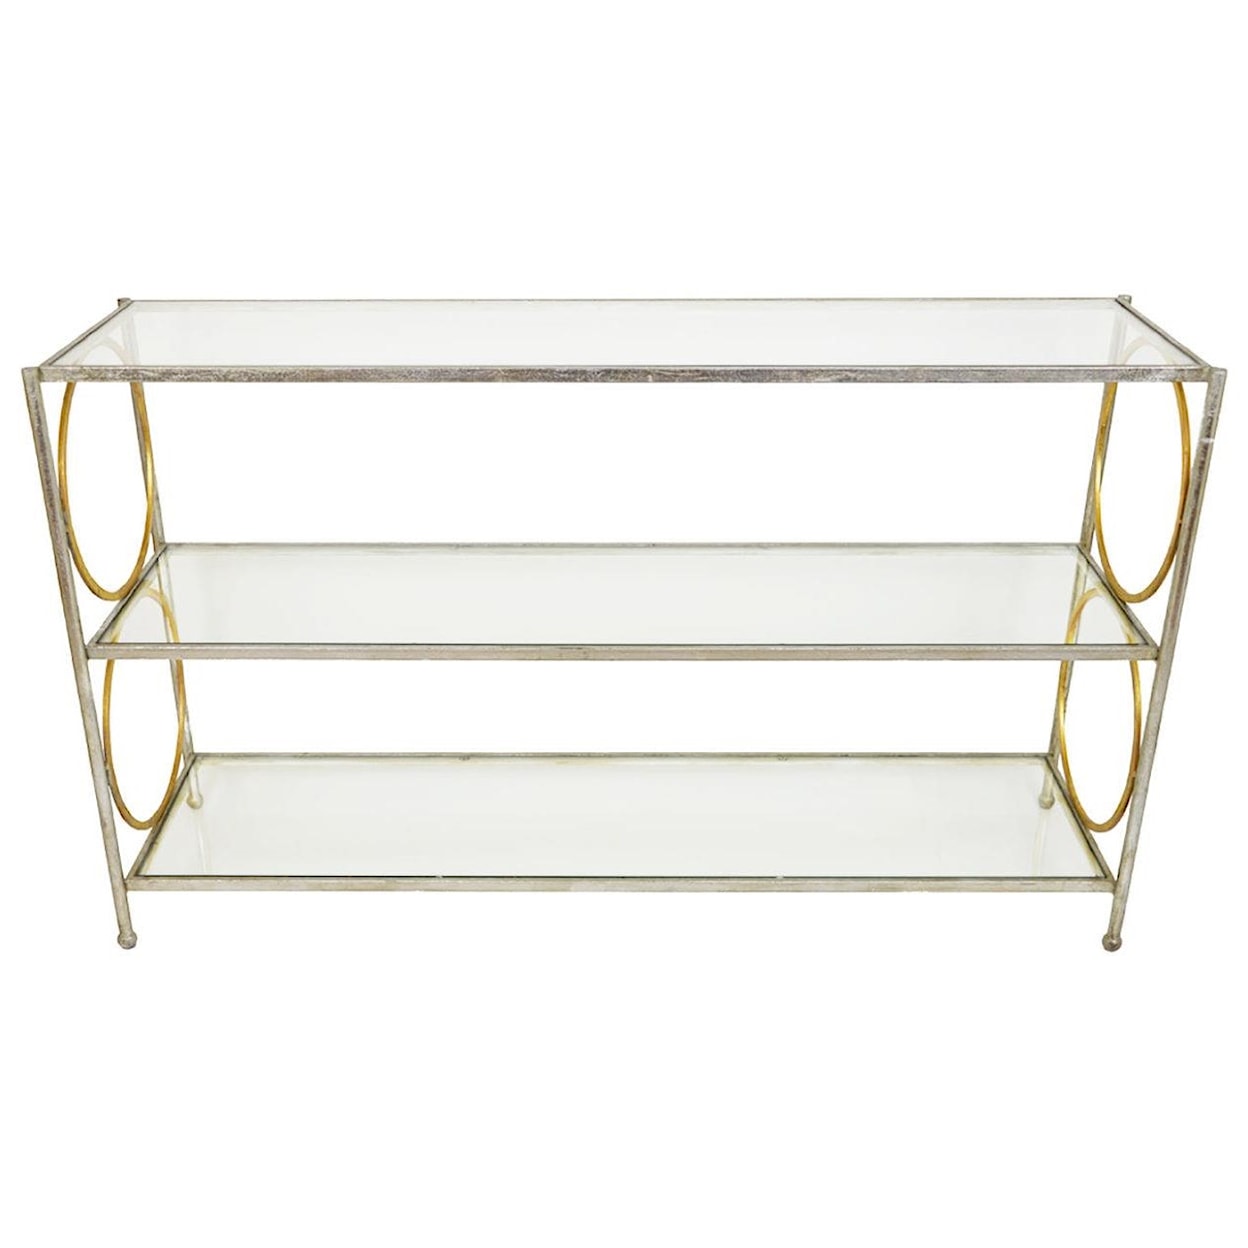 Zeugma Import Console Silver & Gold Cons. Table